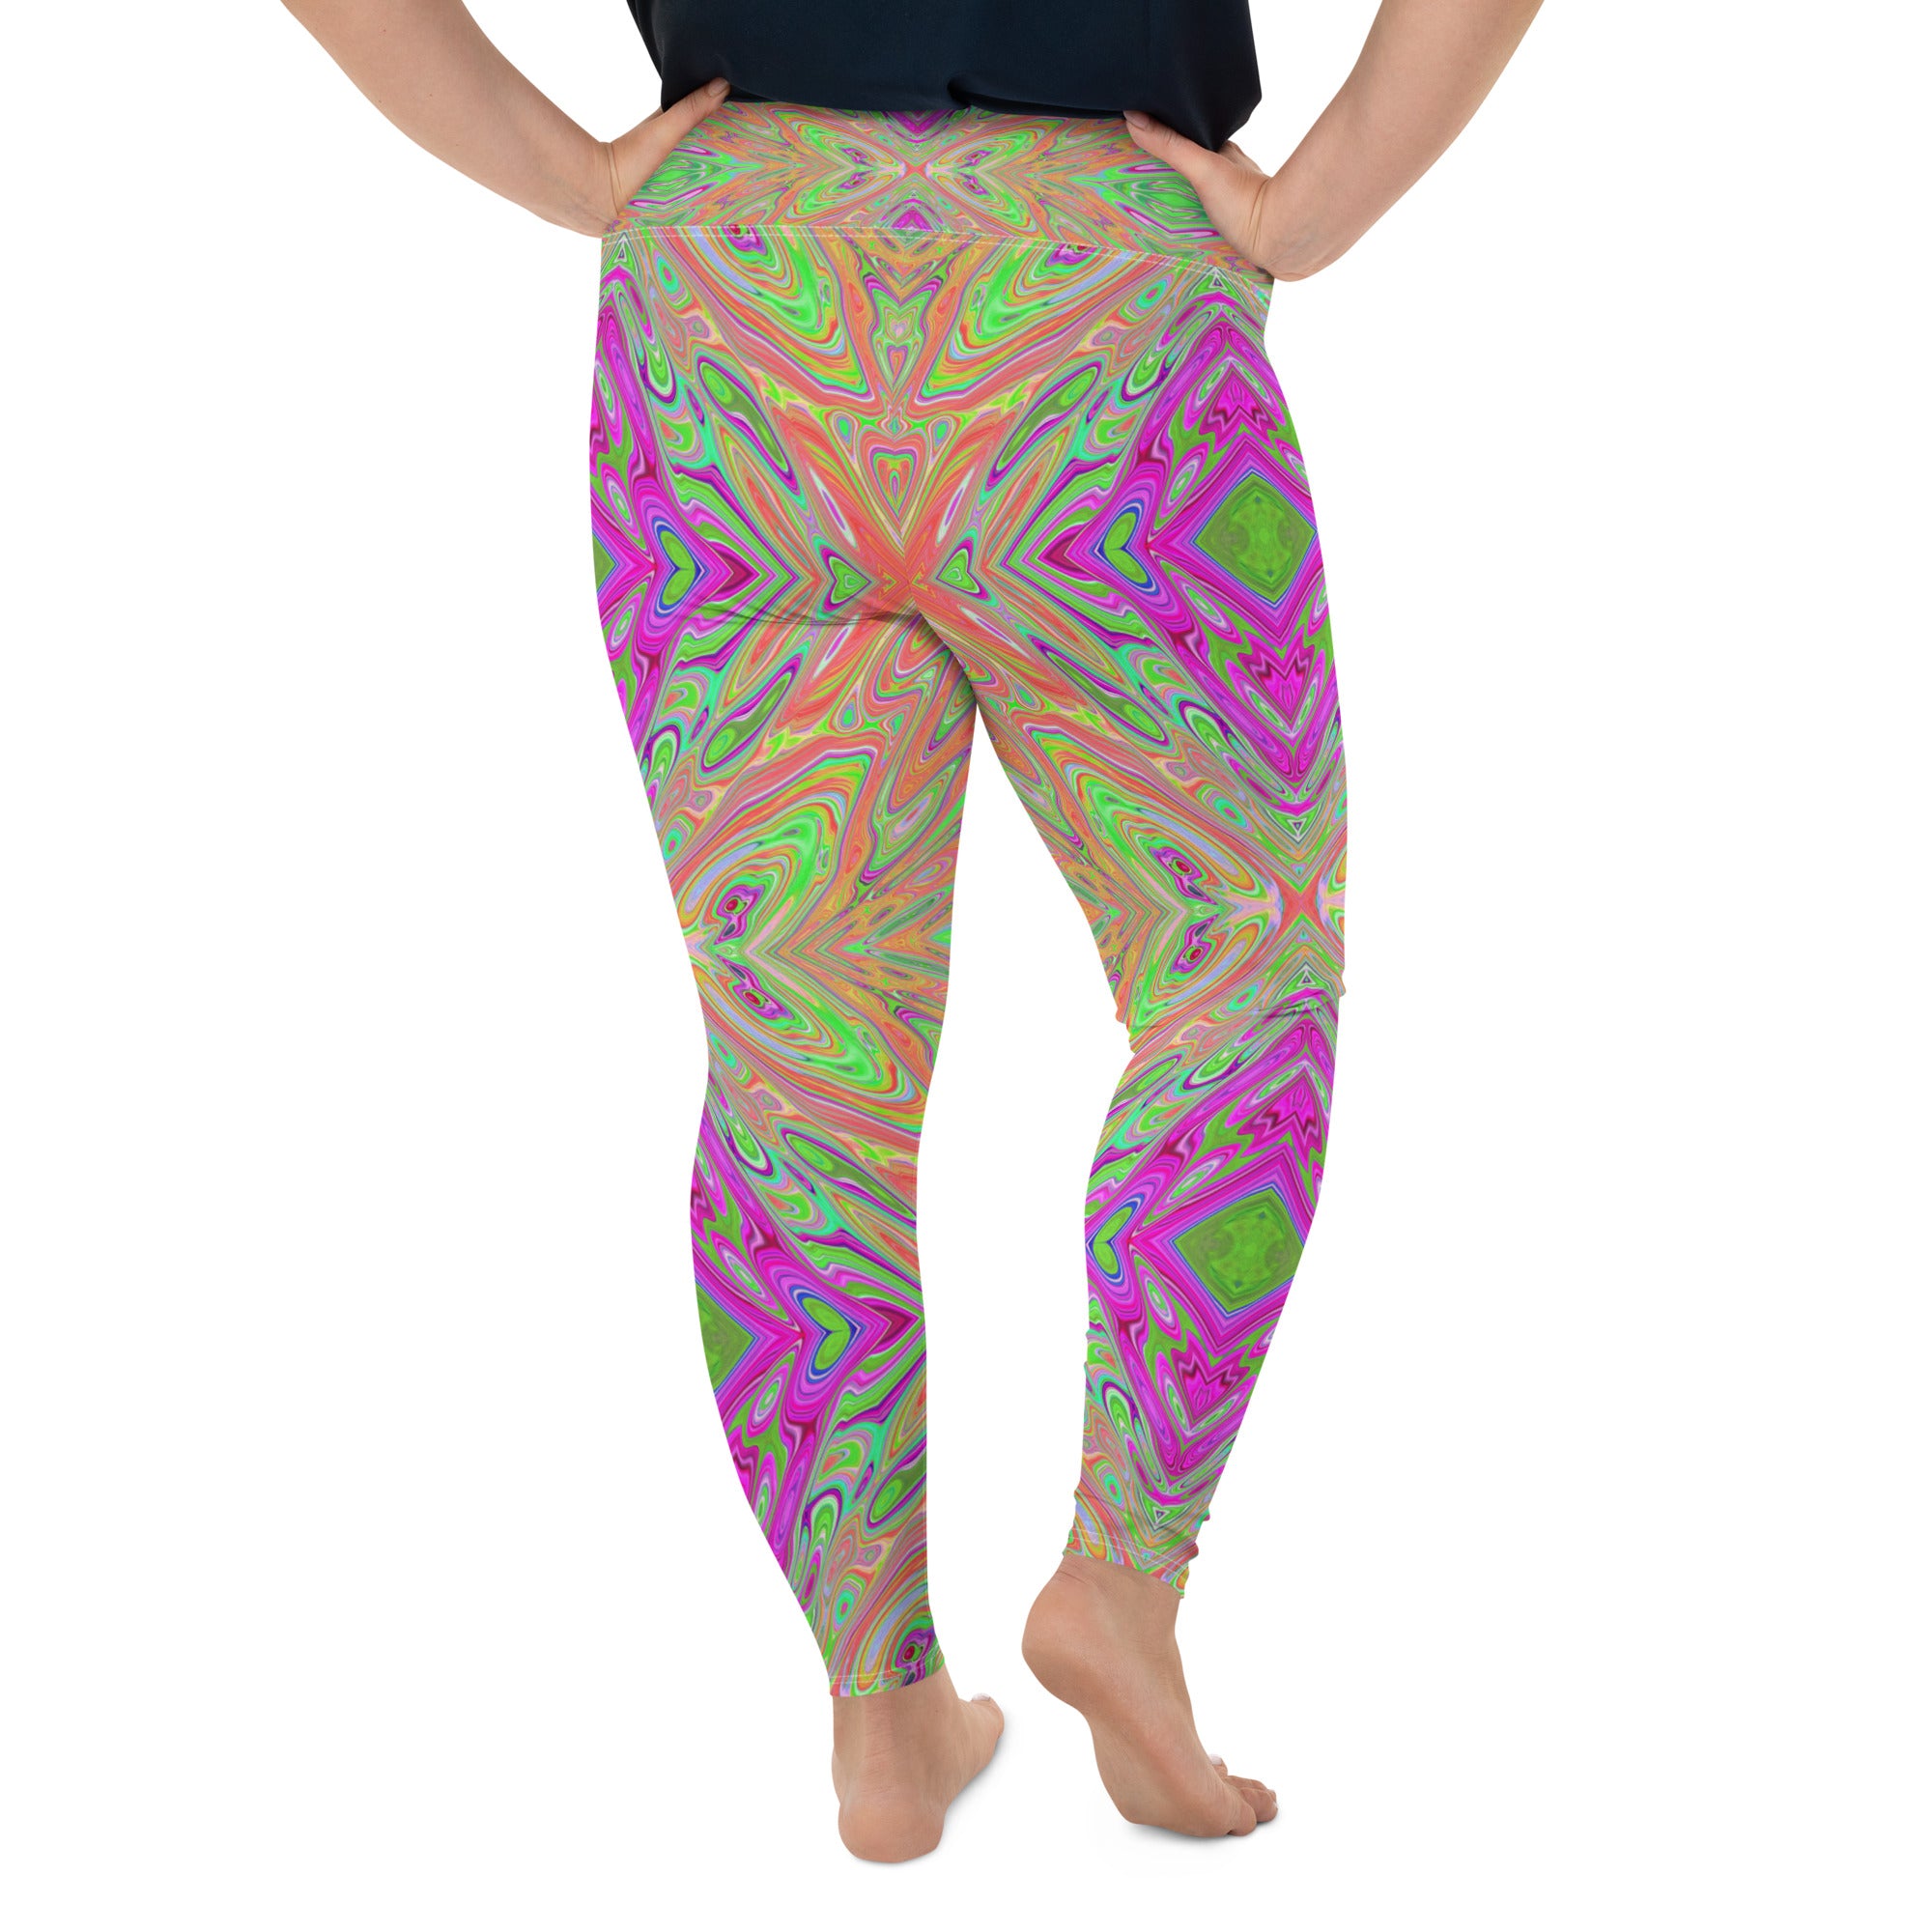 Plus Size Leggings - Trippy Lime Green and Orange Abstract Butterfly